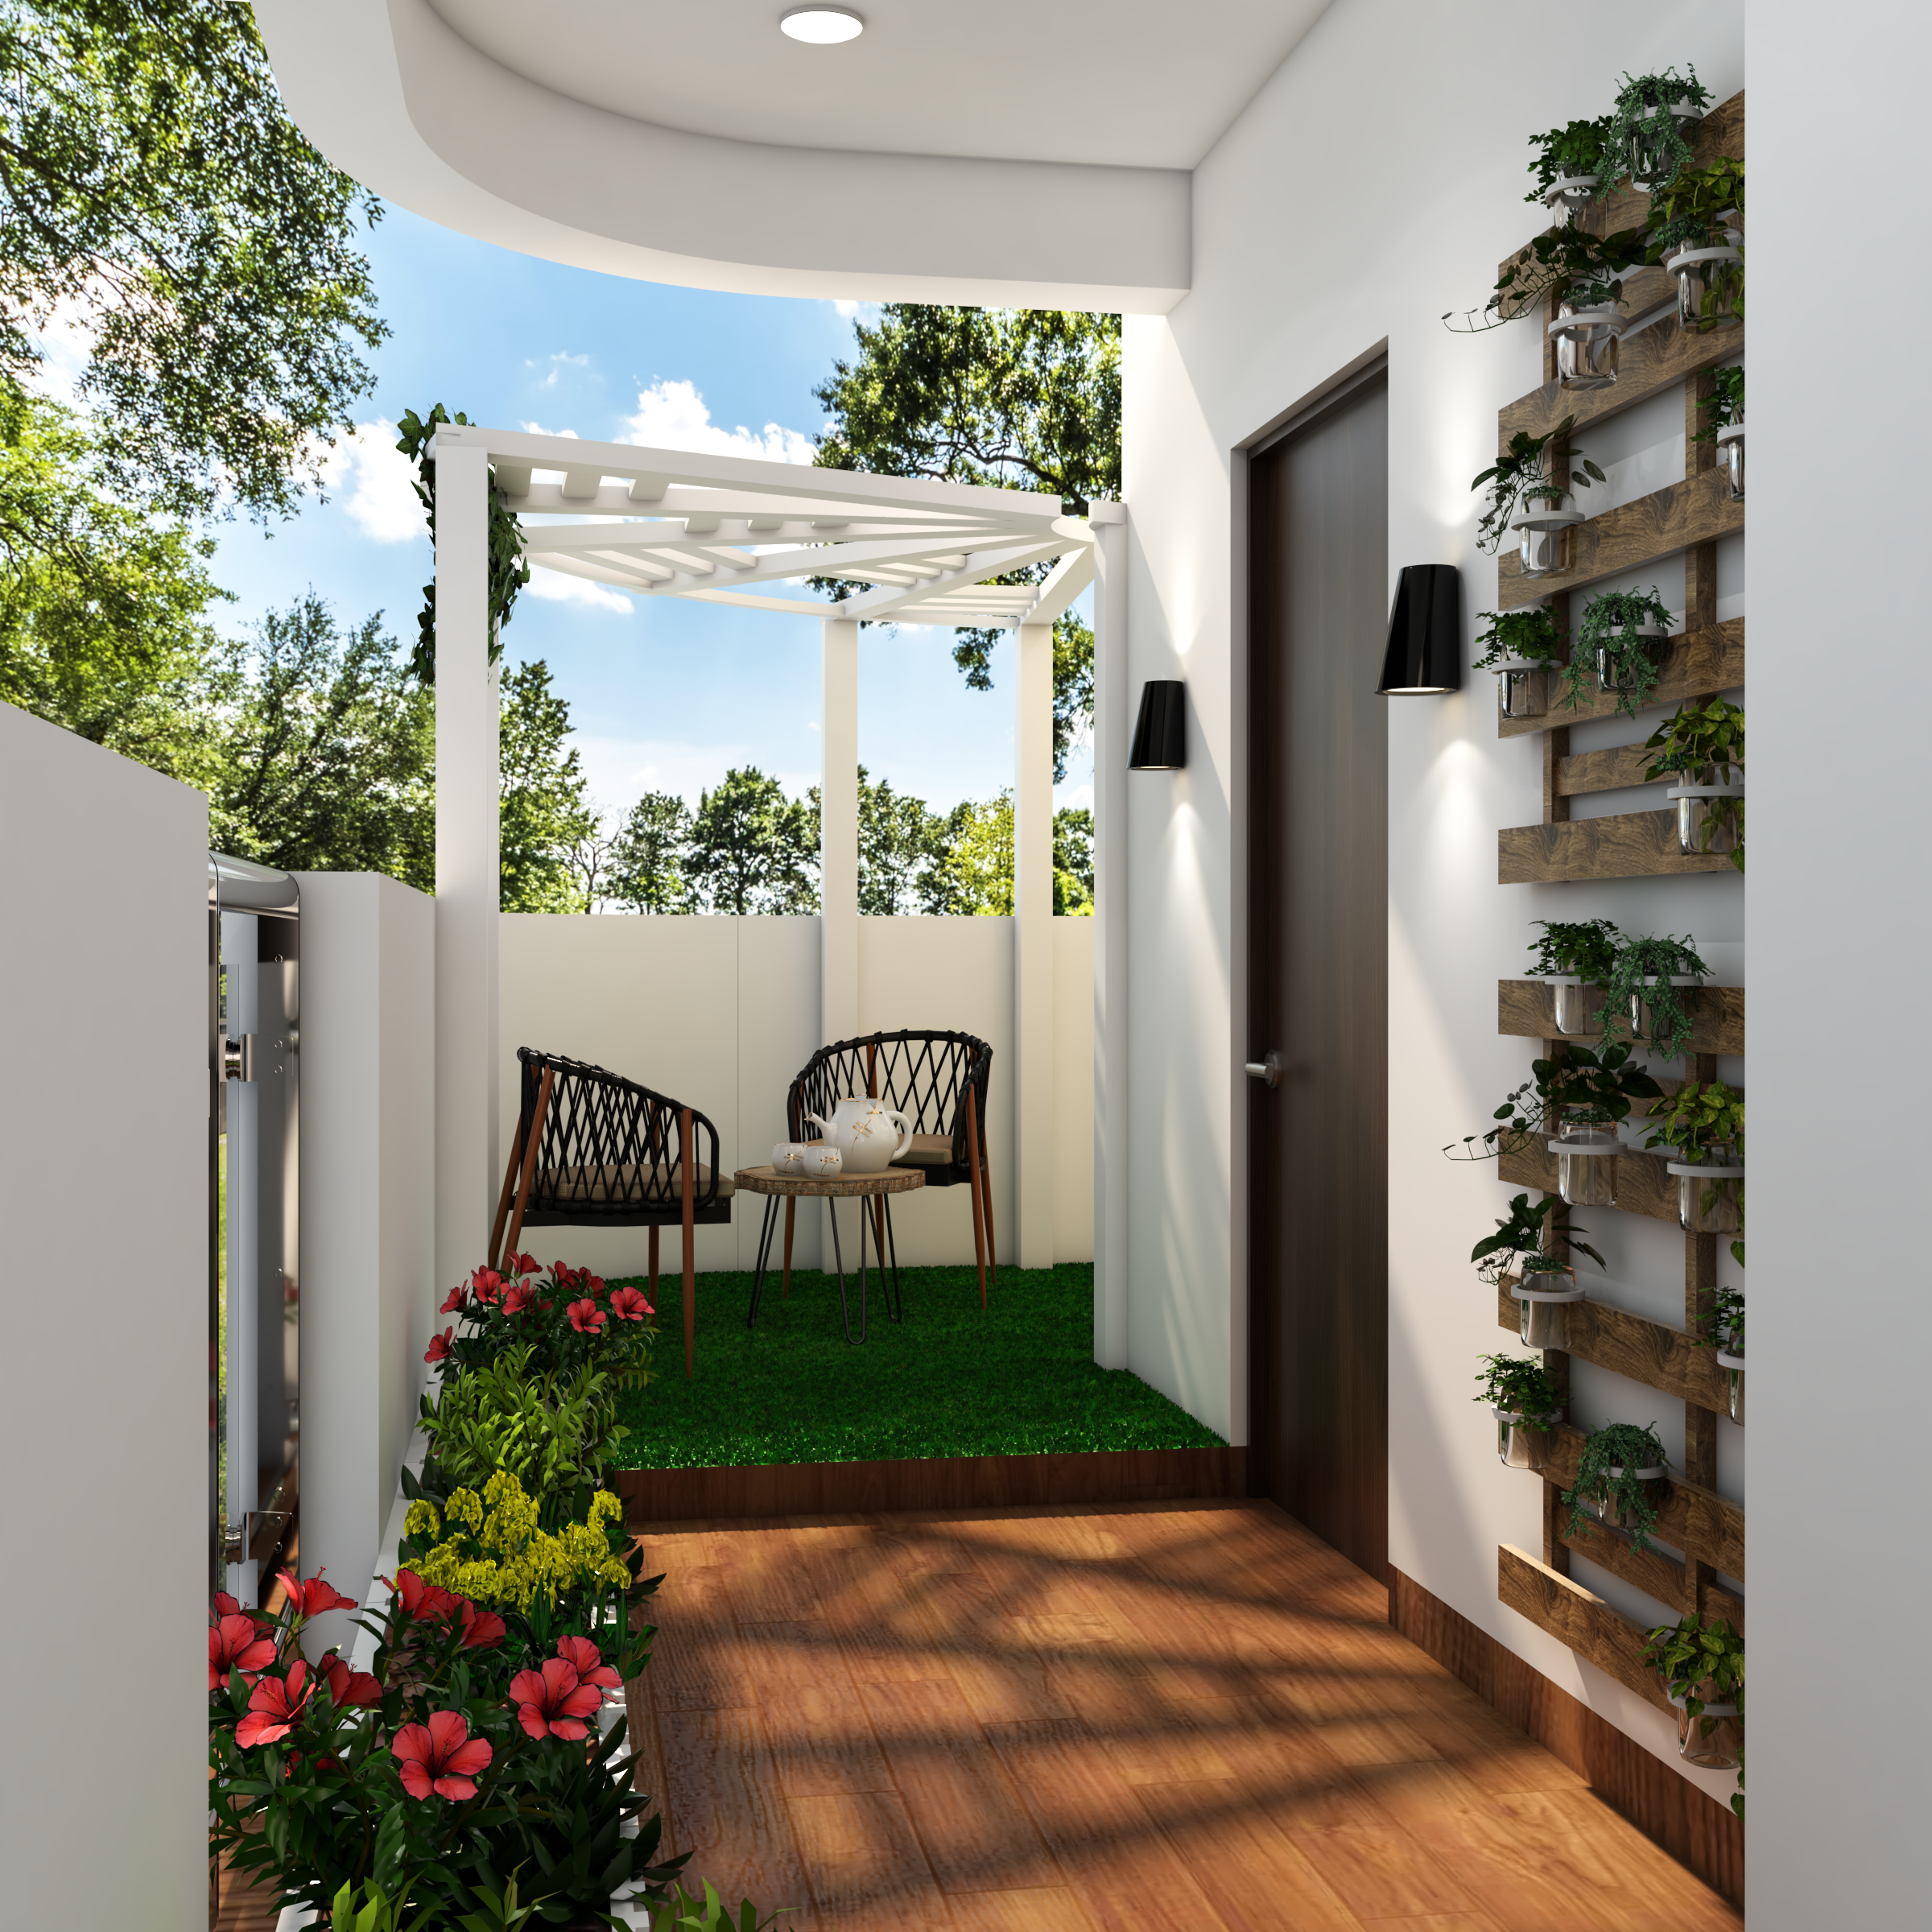 Modern Balcony Design With White Pergola And Wall-Mounted Planters